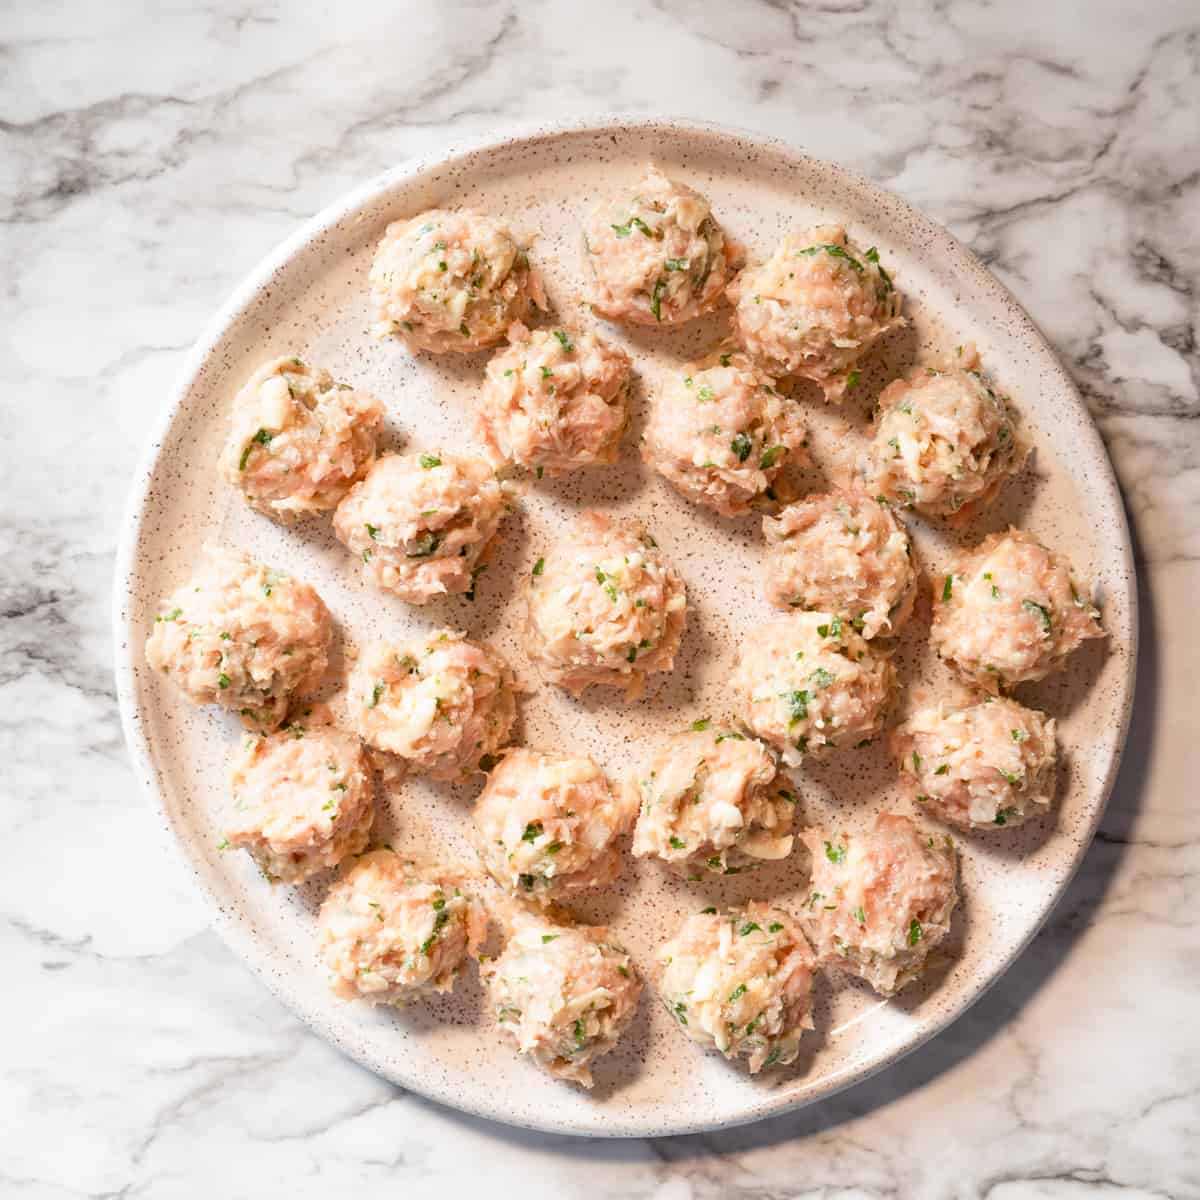 22 formed meatballs on a ceramic plate